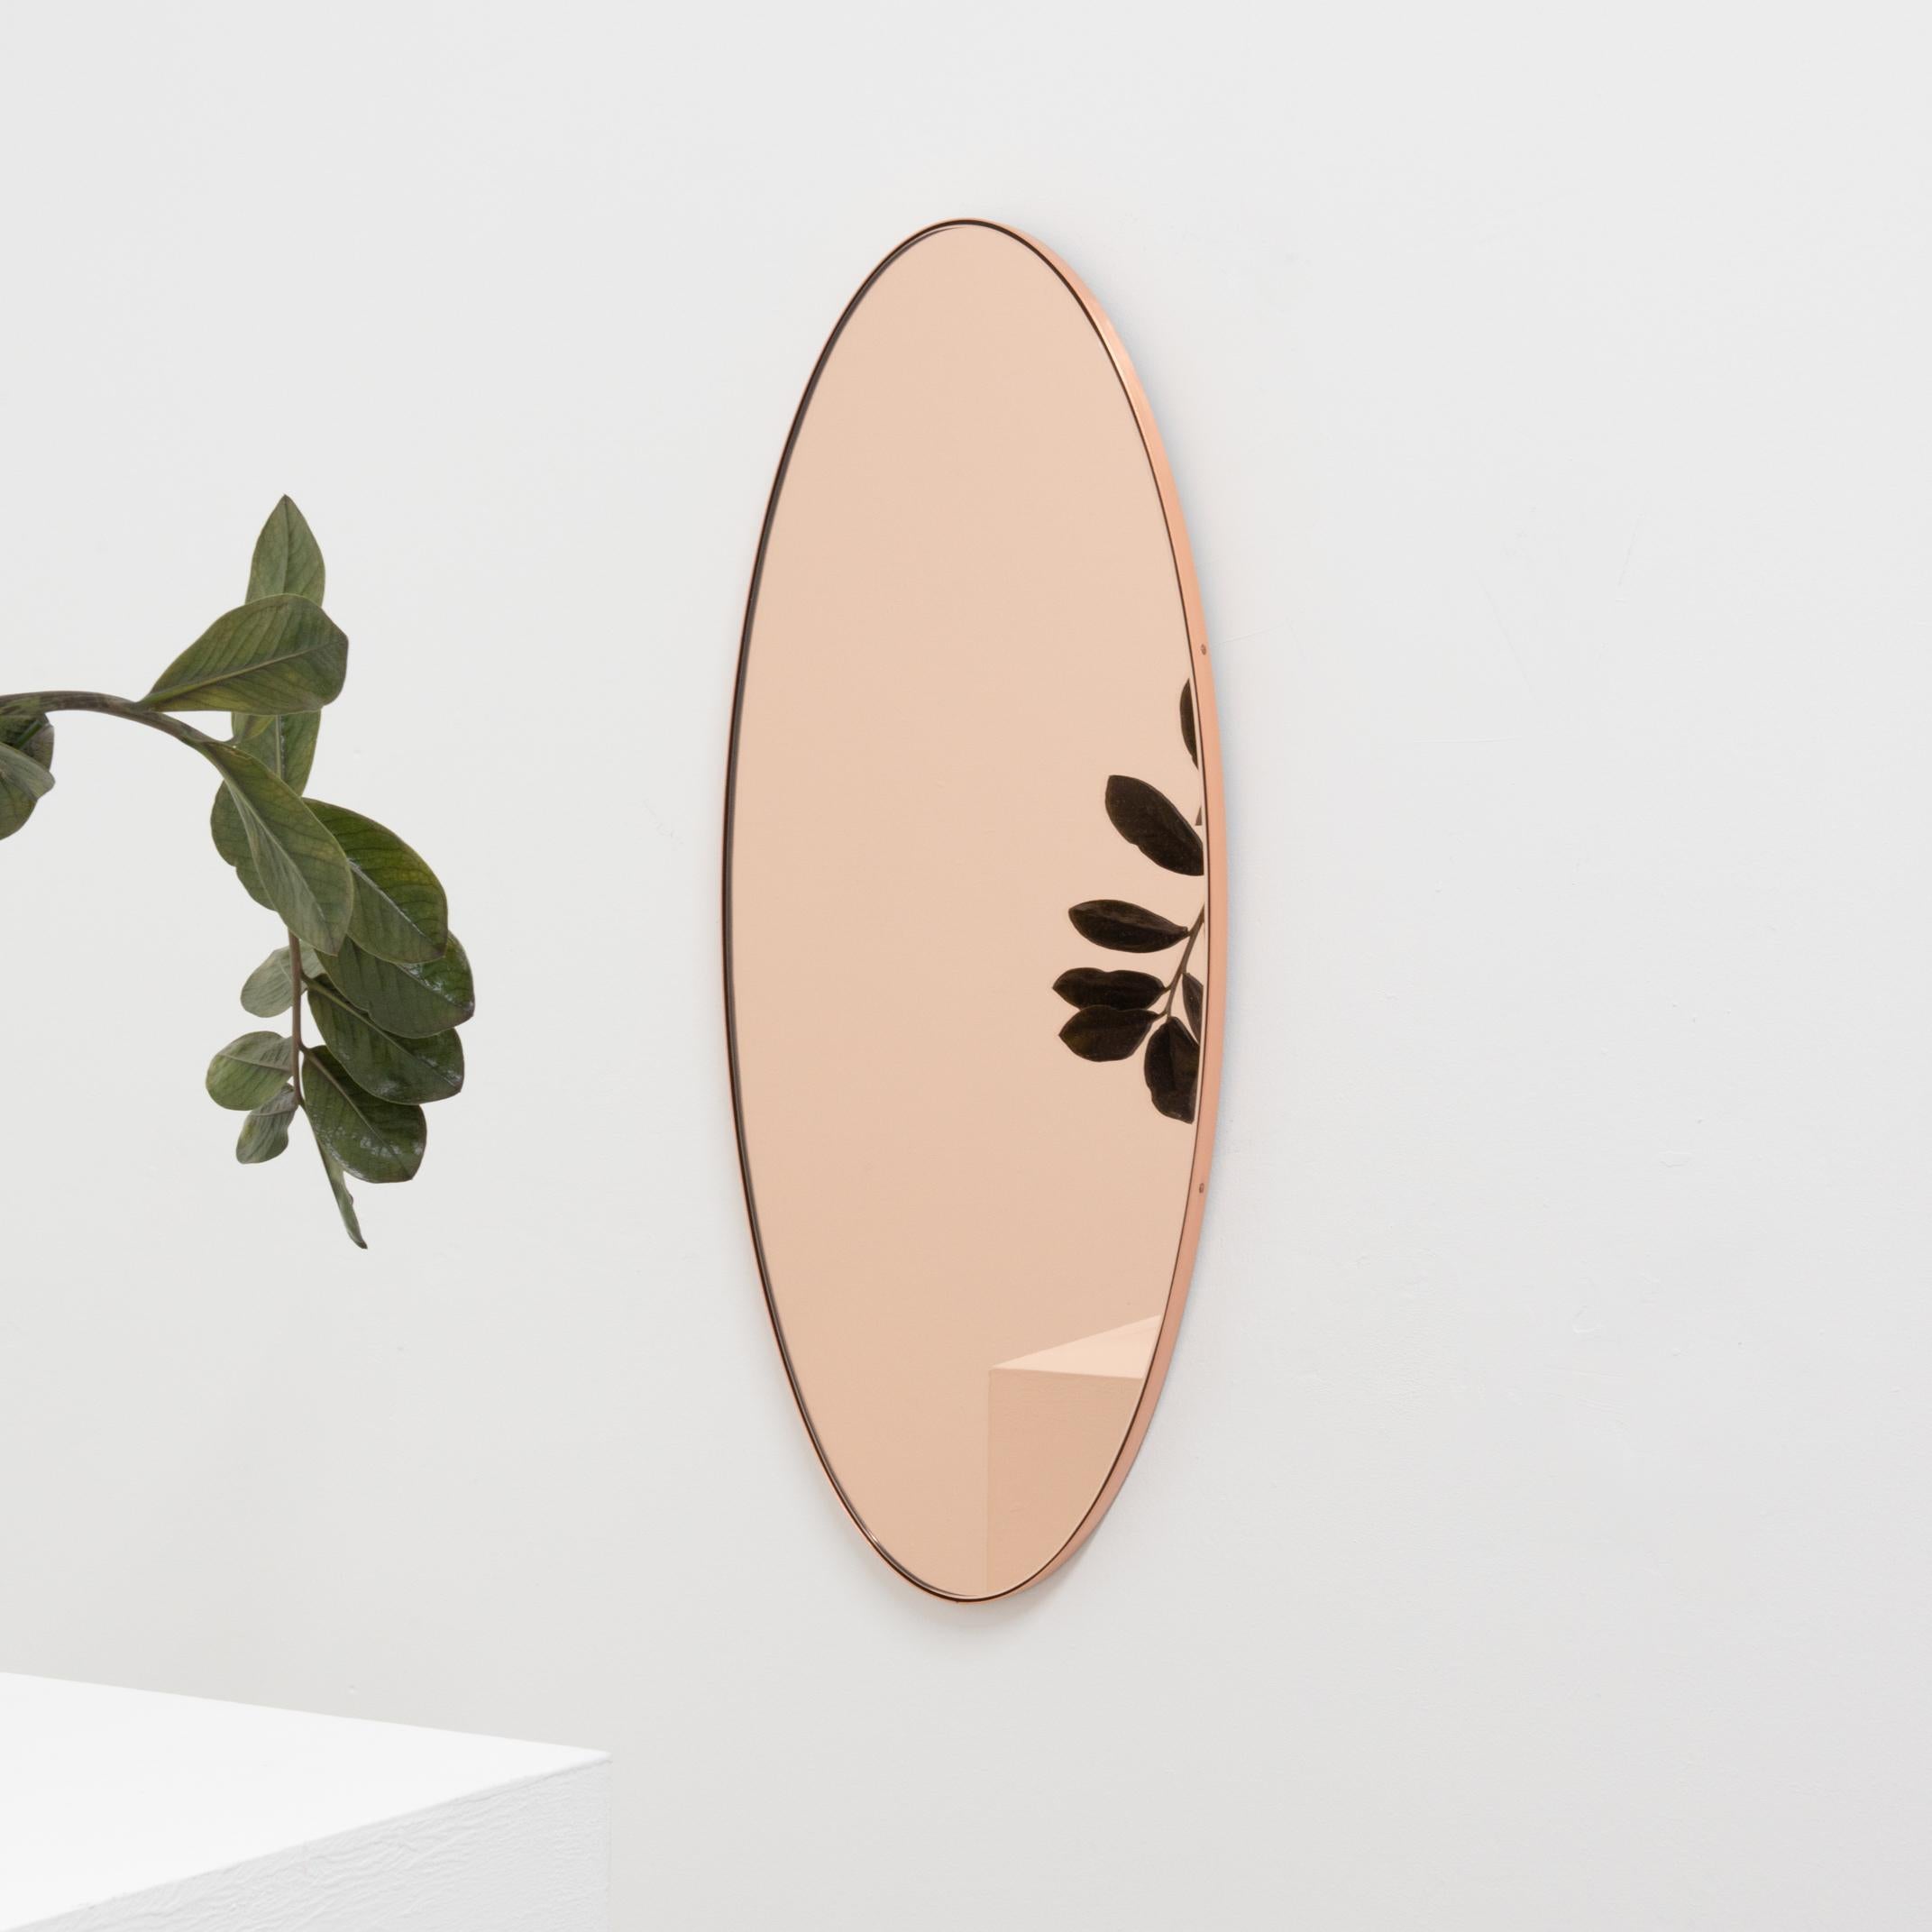 In Stock Ovalis Oval Shaped Rose Gold Mirror with Copper Frame, Small In New Condition For Sale In London, GB